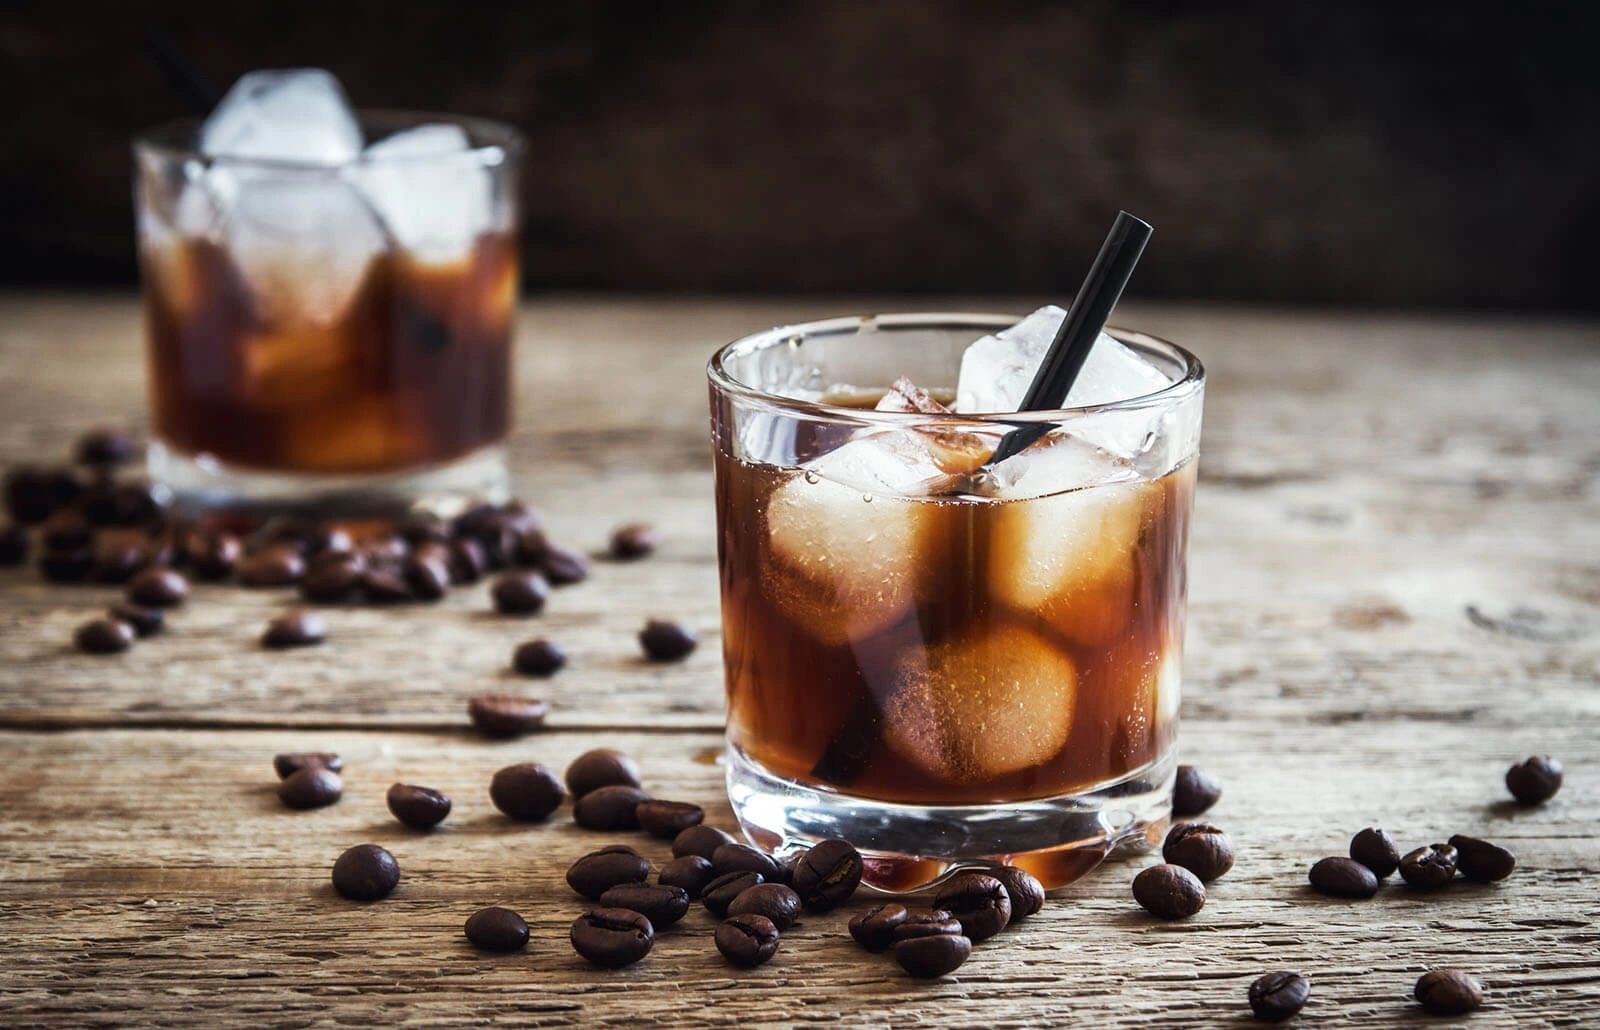 How to make a Black Russian